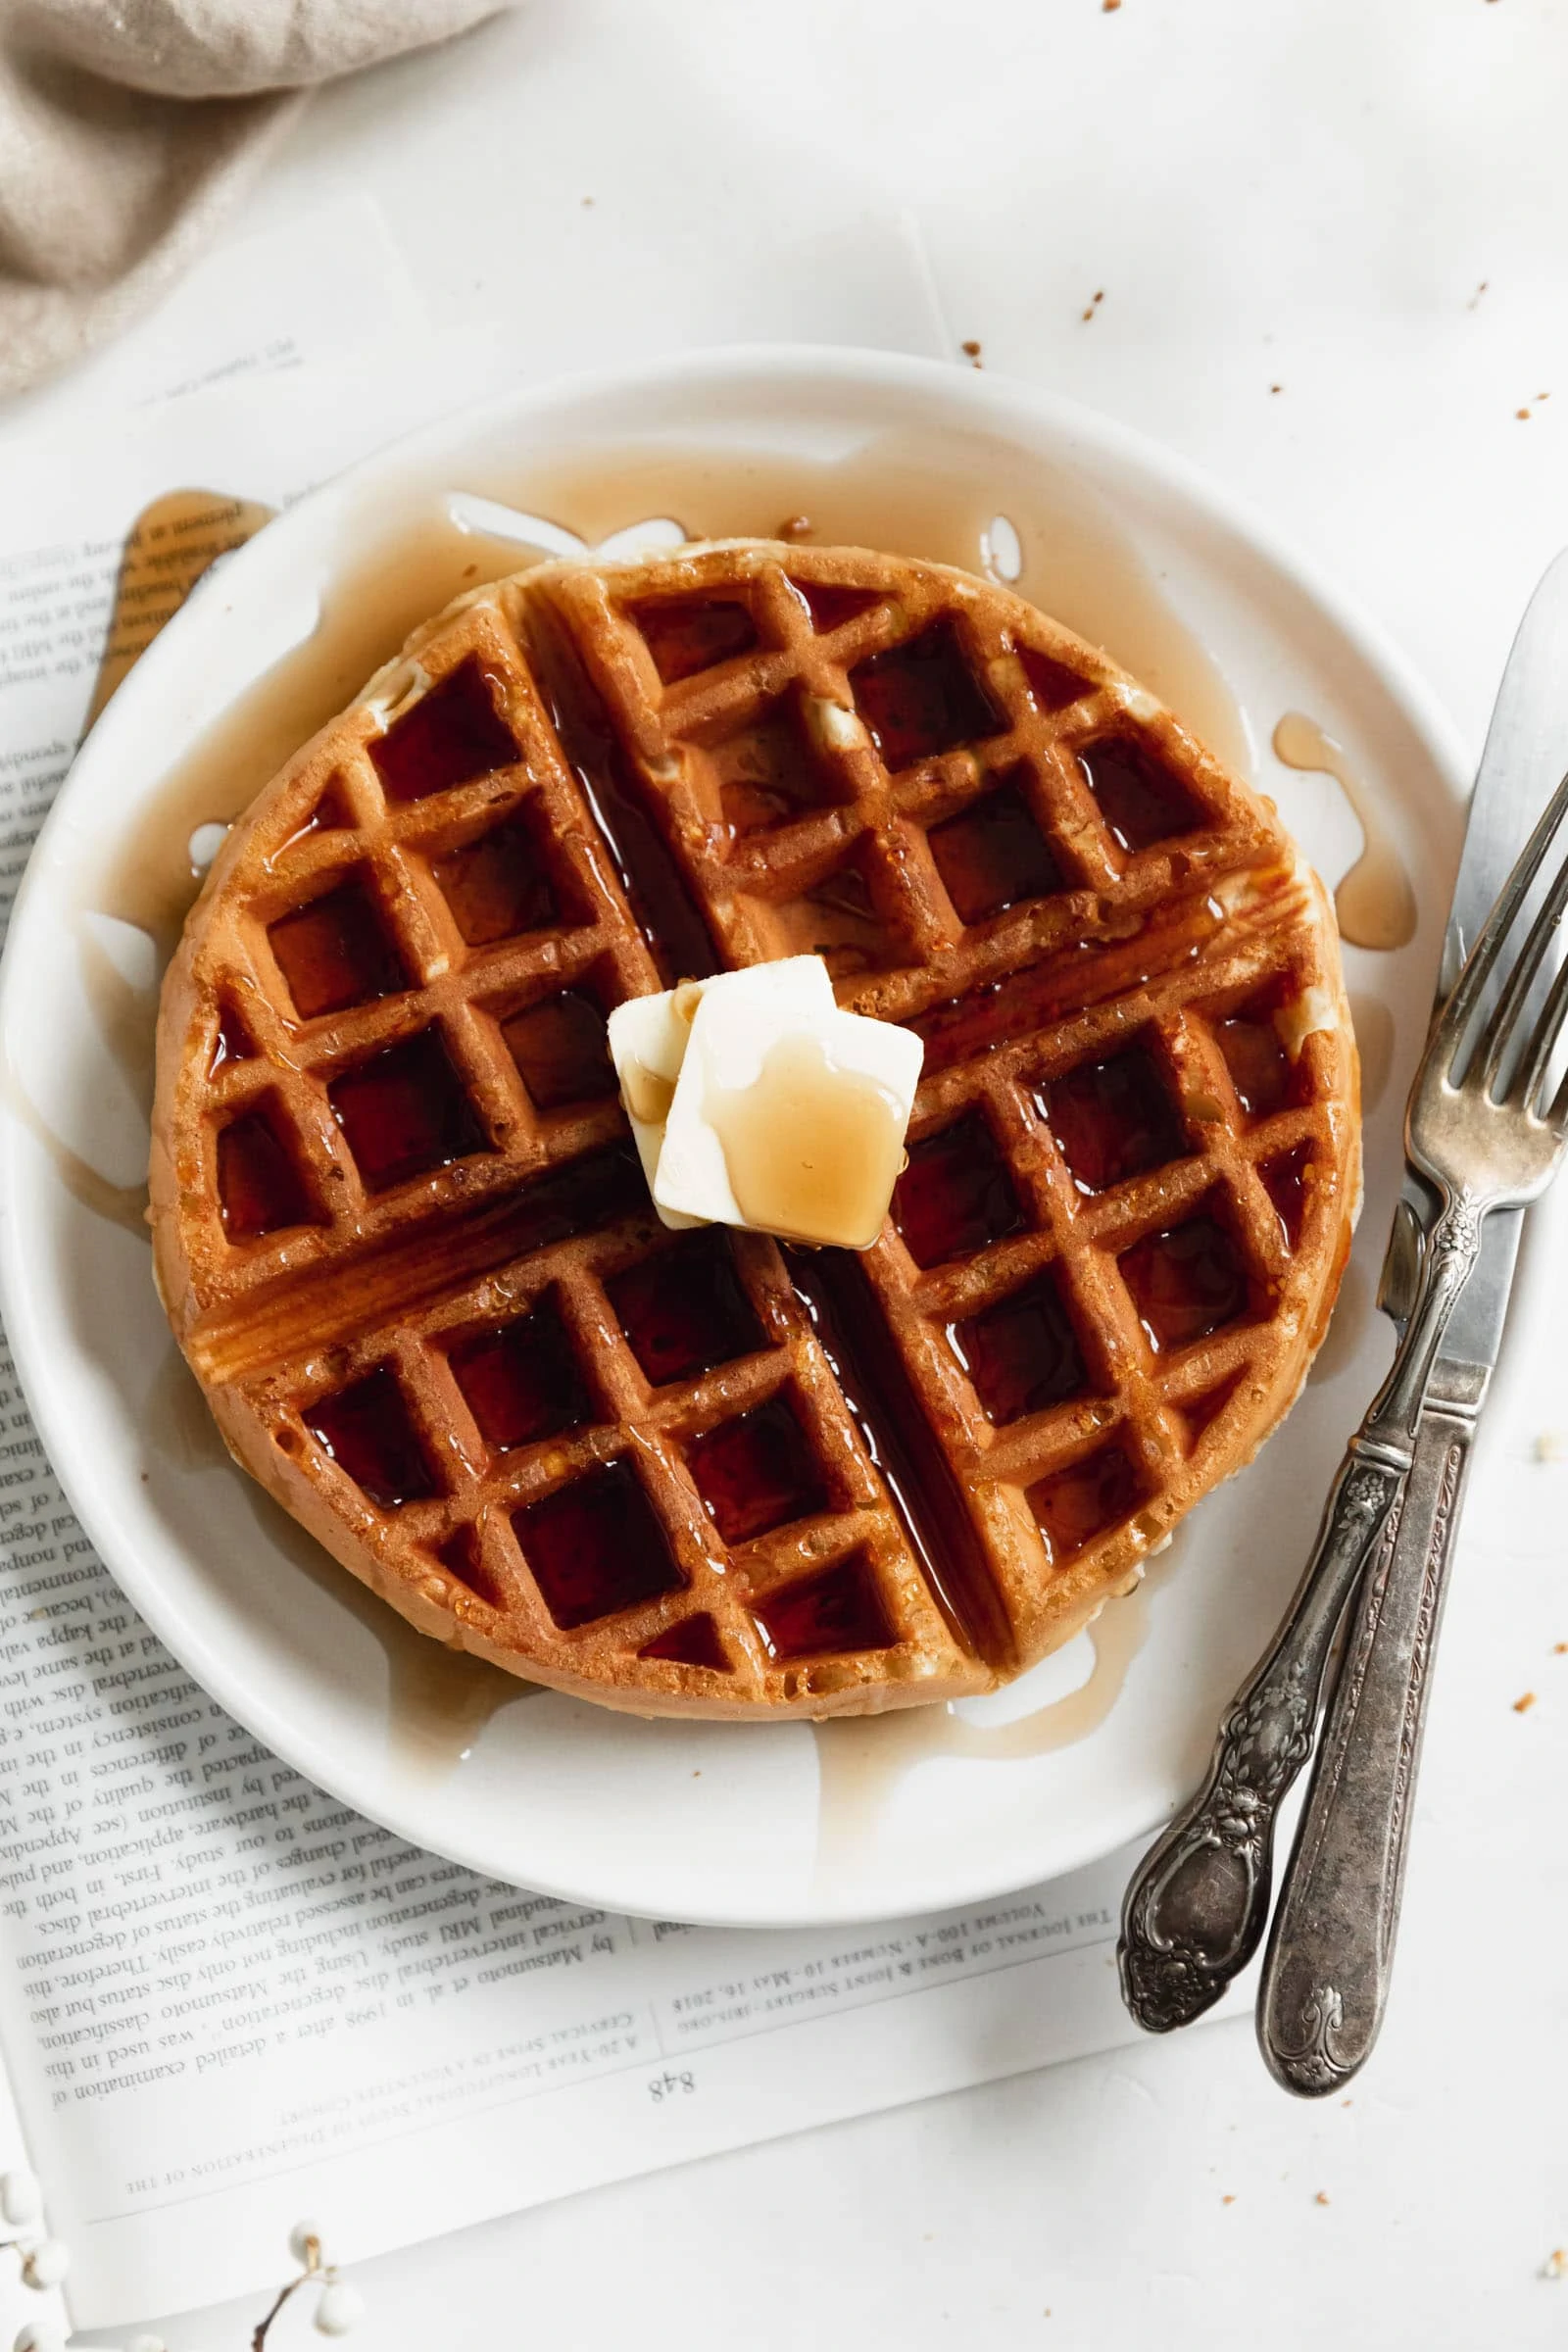 The Belgian Syrup That Makes Everything Taste Better